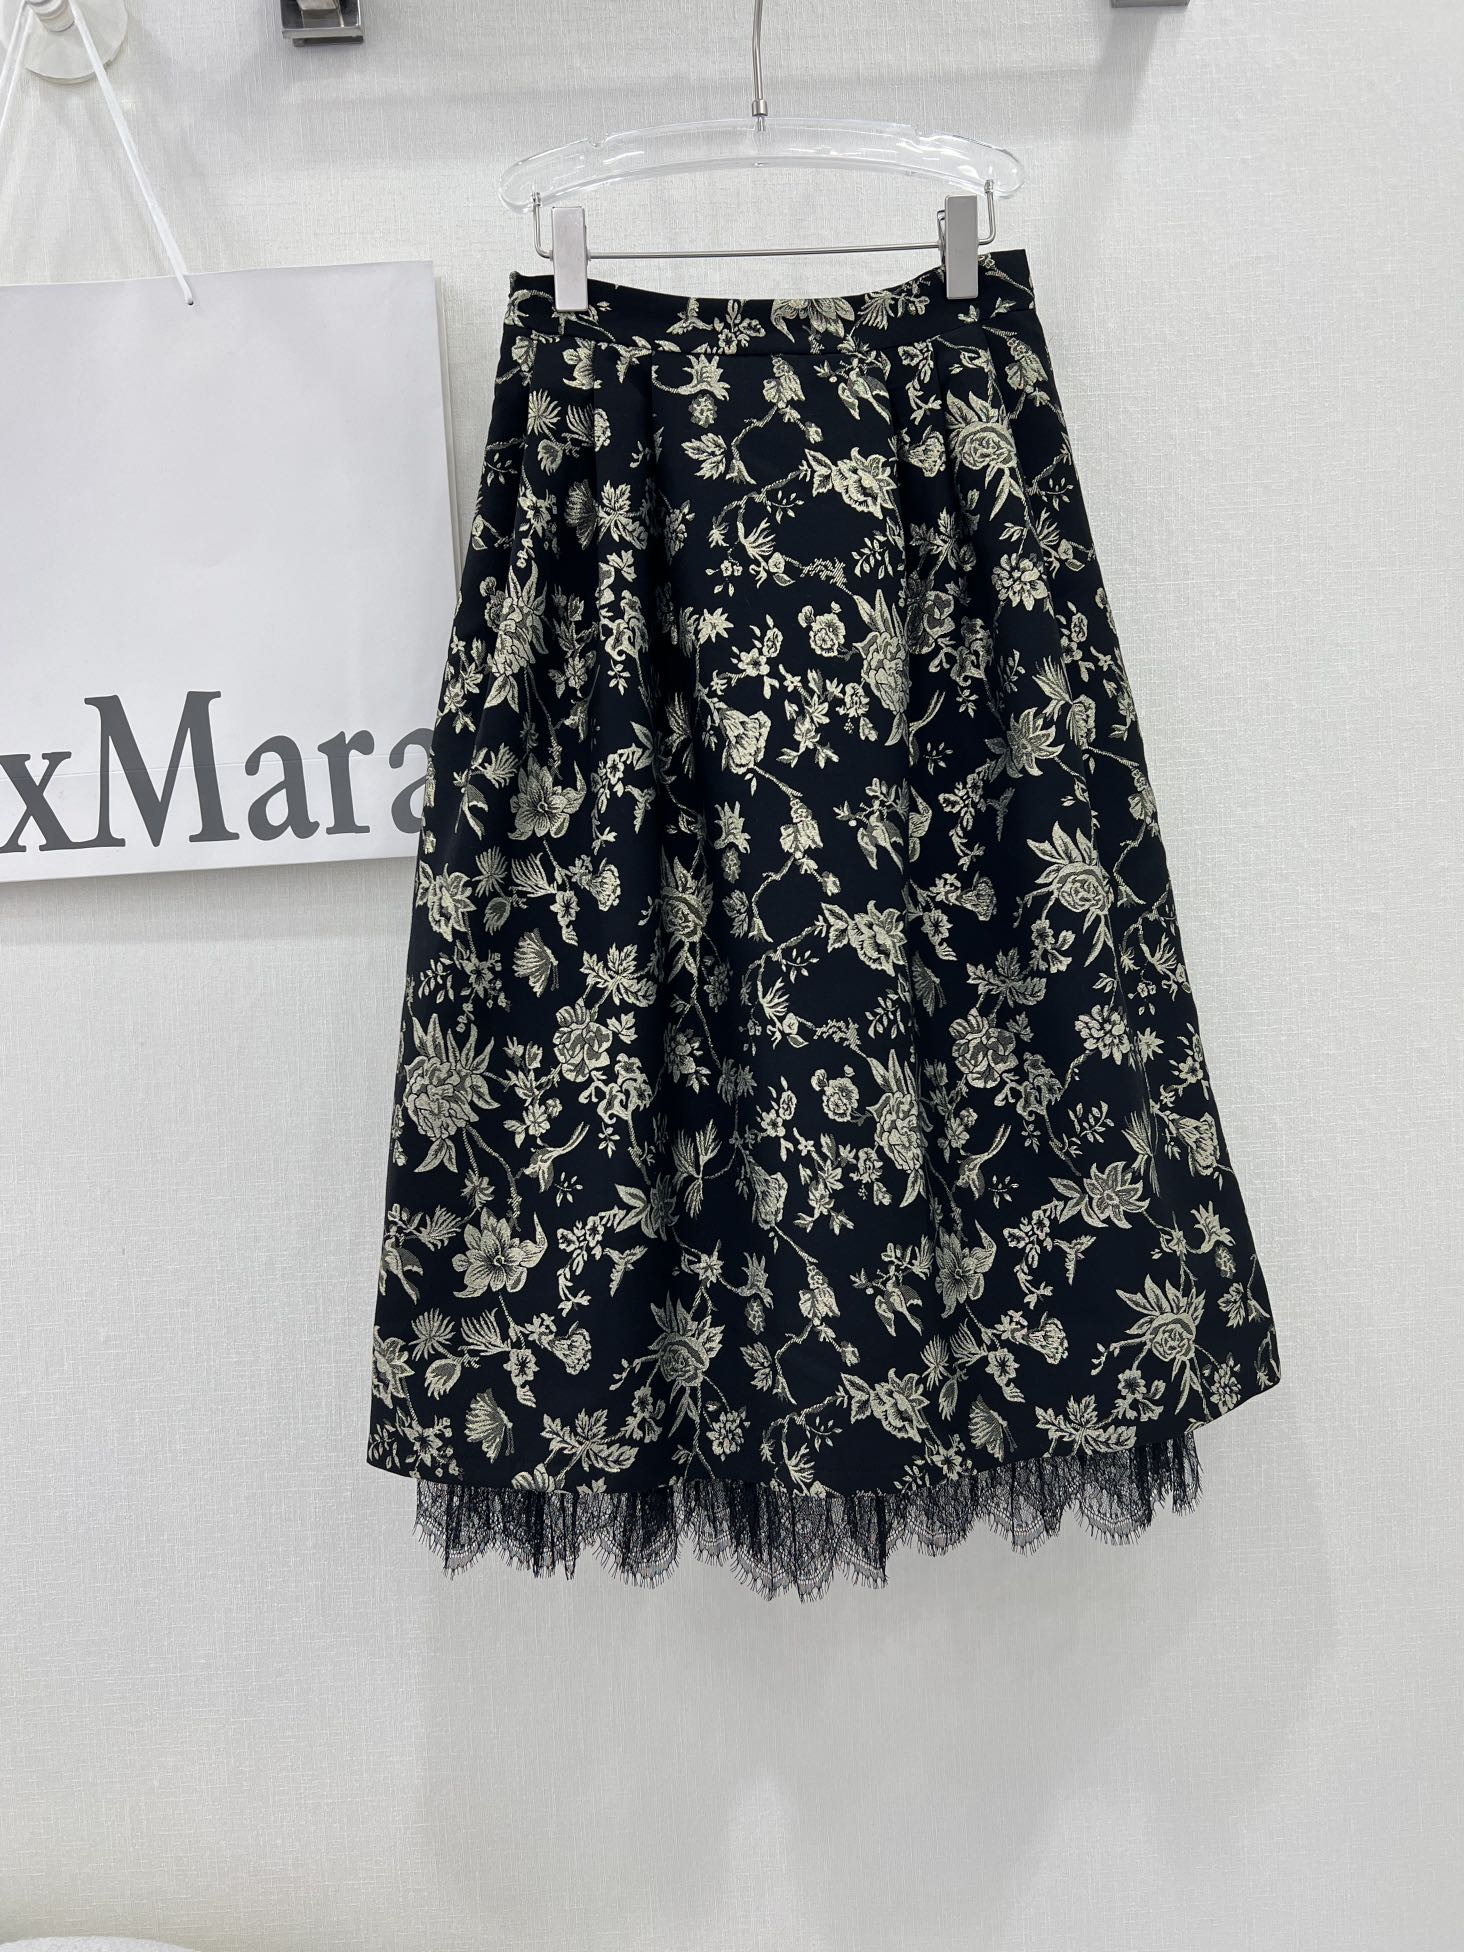 Dior Clothing Skirts Black Gold Embroidery Lace Spring Collection